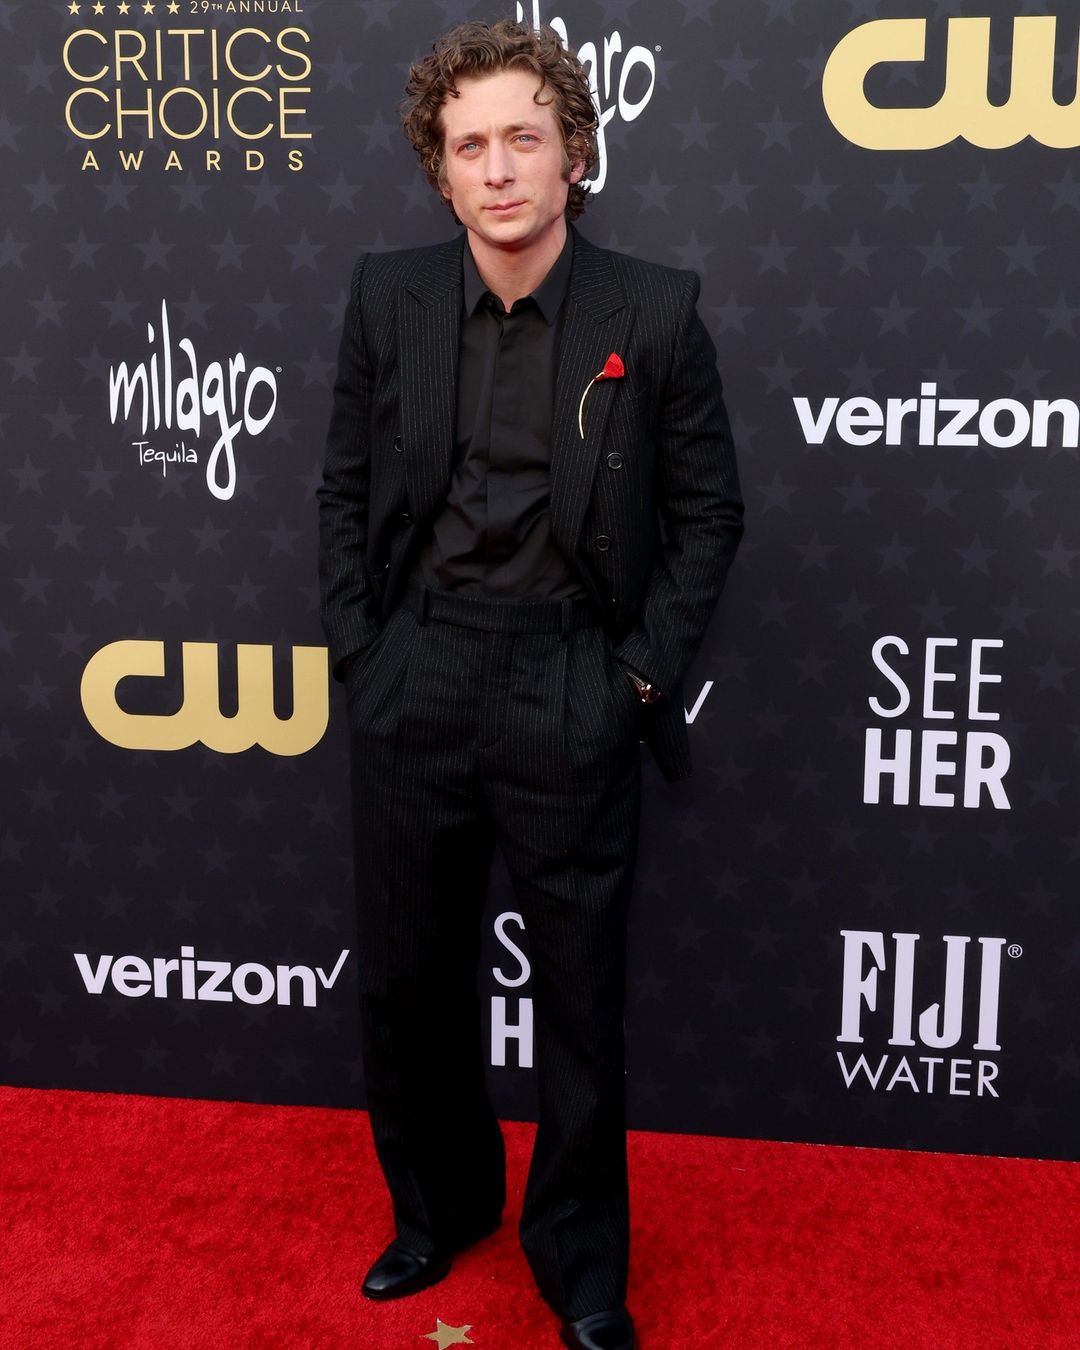 The best actor in a comedy series winner for his role in The Bear, Jeremy Allen White looked dapper in a pinstriped black Saint Laurent suit. He accessorized his outfit with a Bulgari red lapel pin, adding a hint of color and contrast to his ensemble. His signature curls and shiny oxfords completed his solid look.